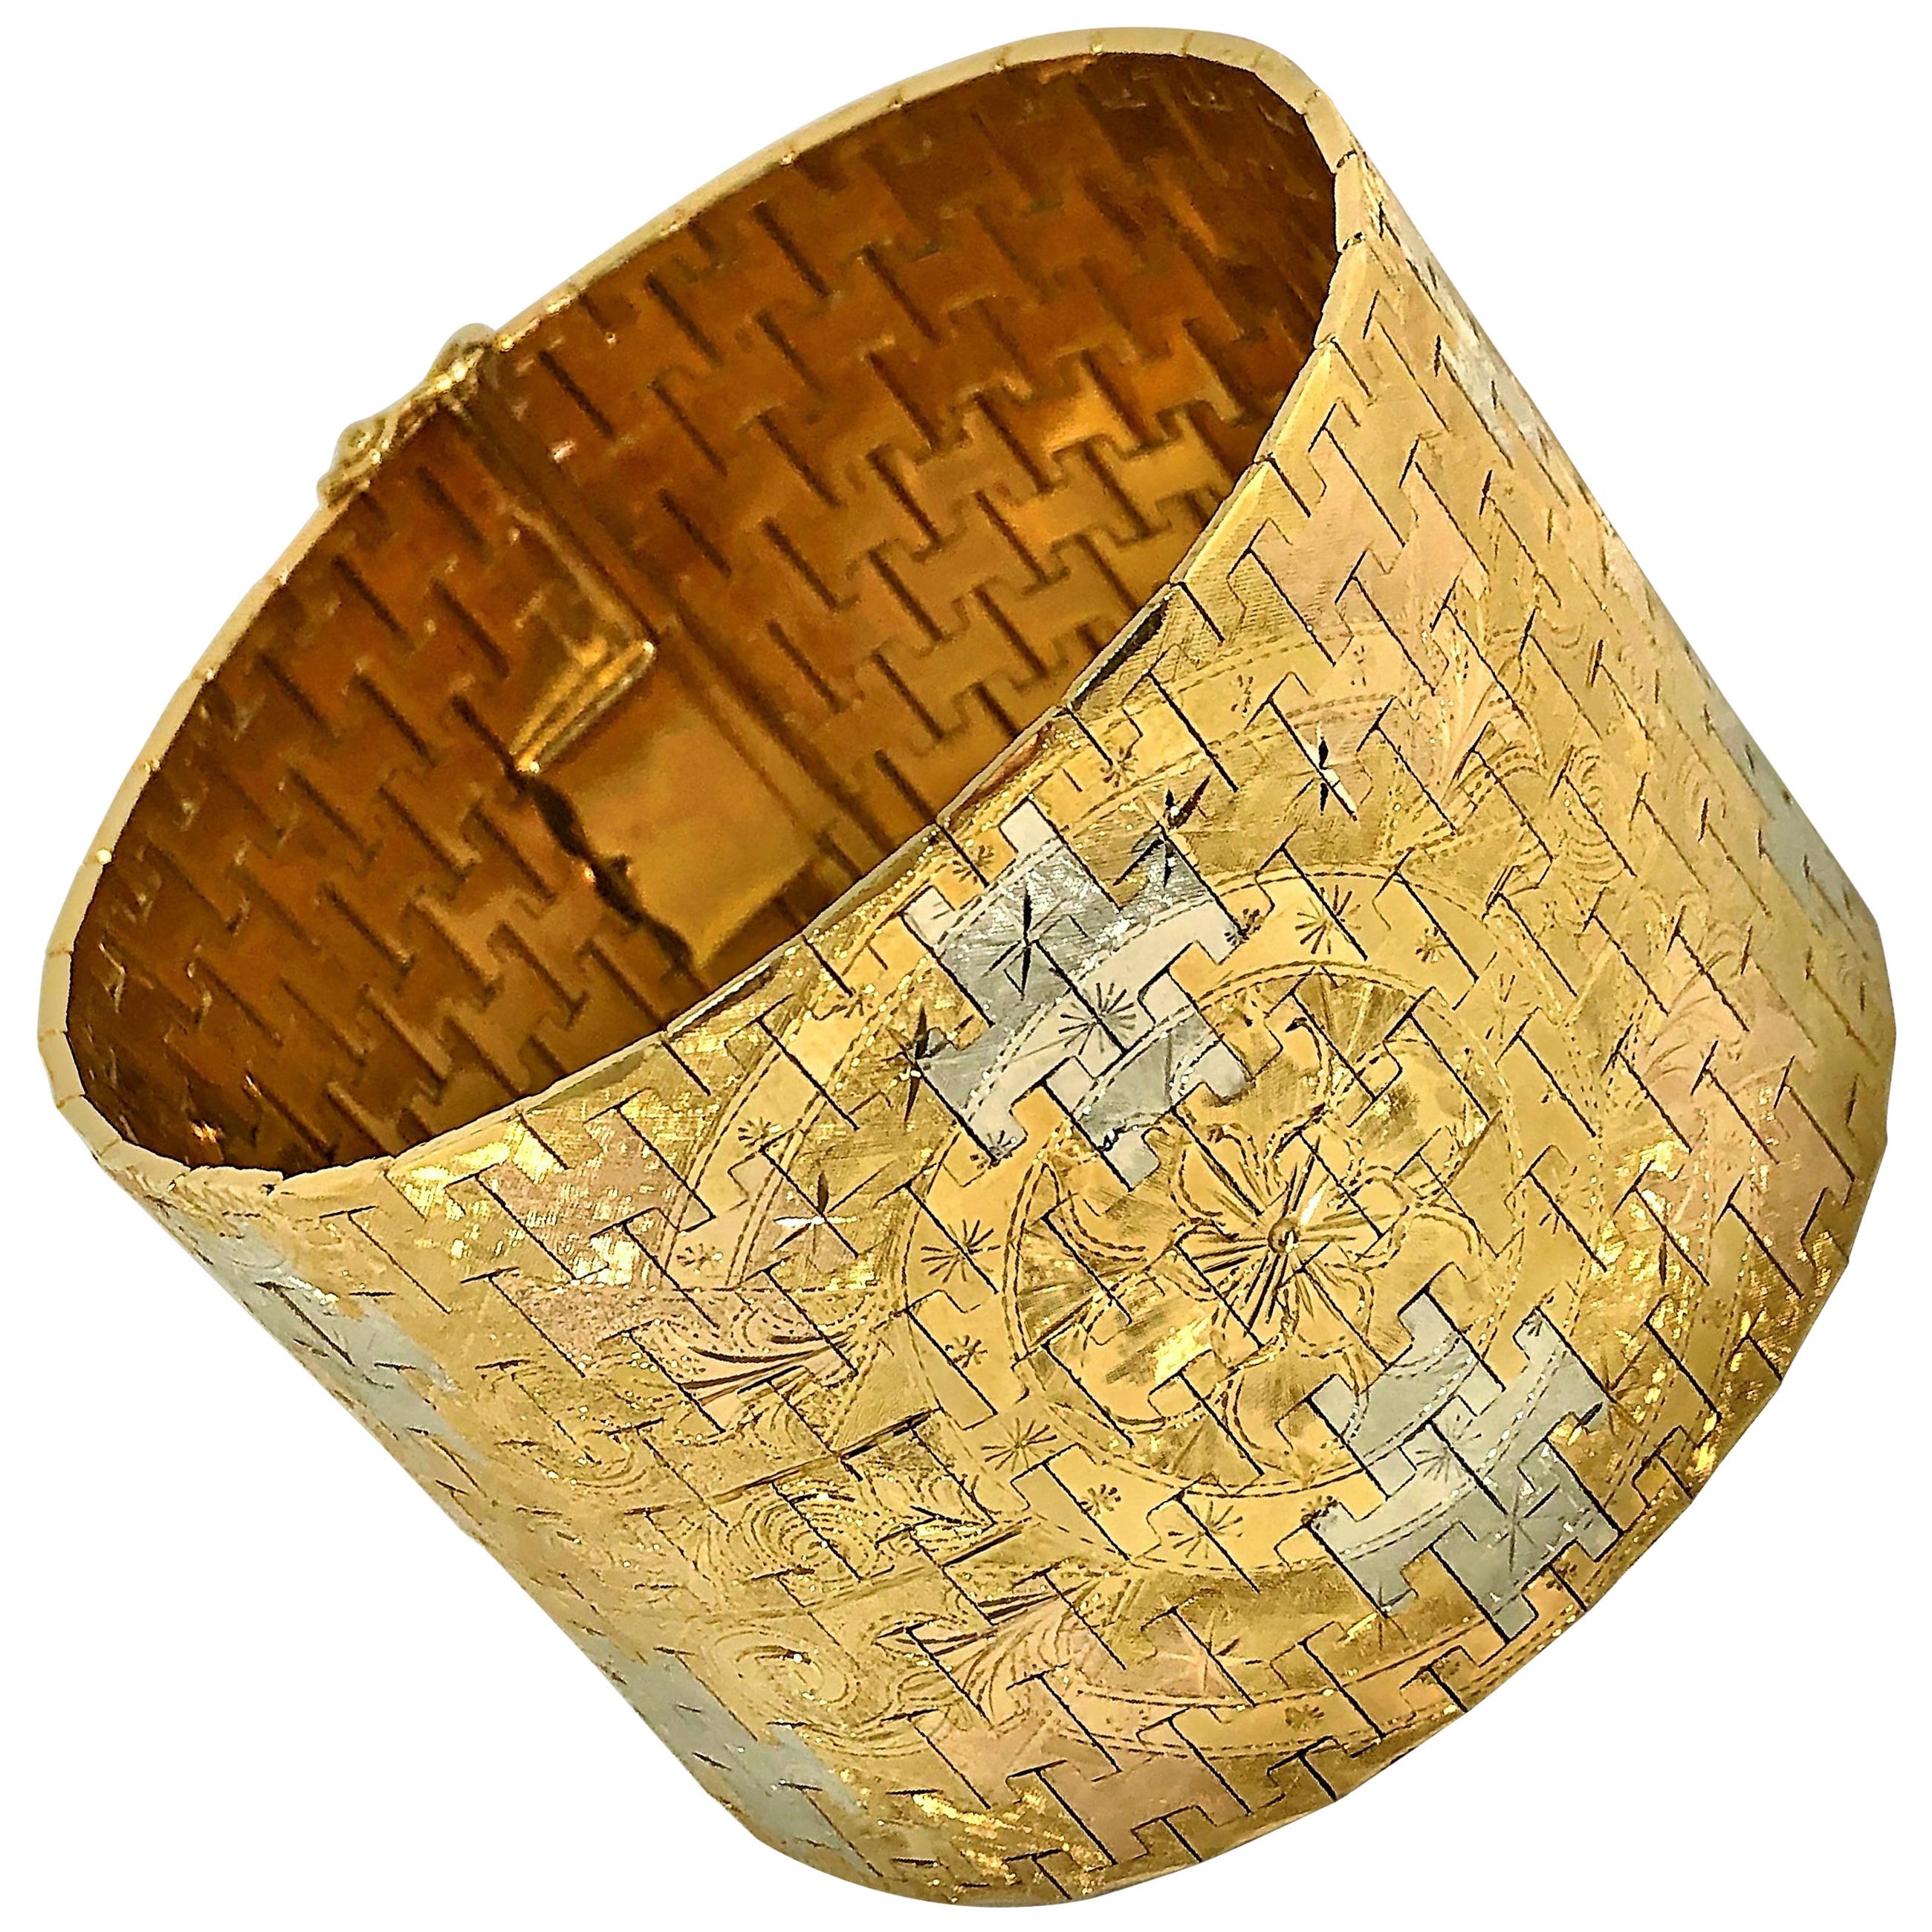 1950s Extra Wide & Extra Heavy Florentine Hand Engraved Tri-Color Gold Bracelet